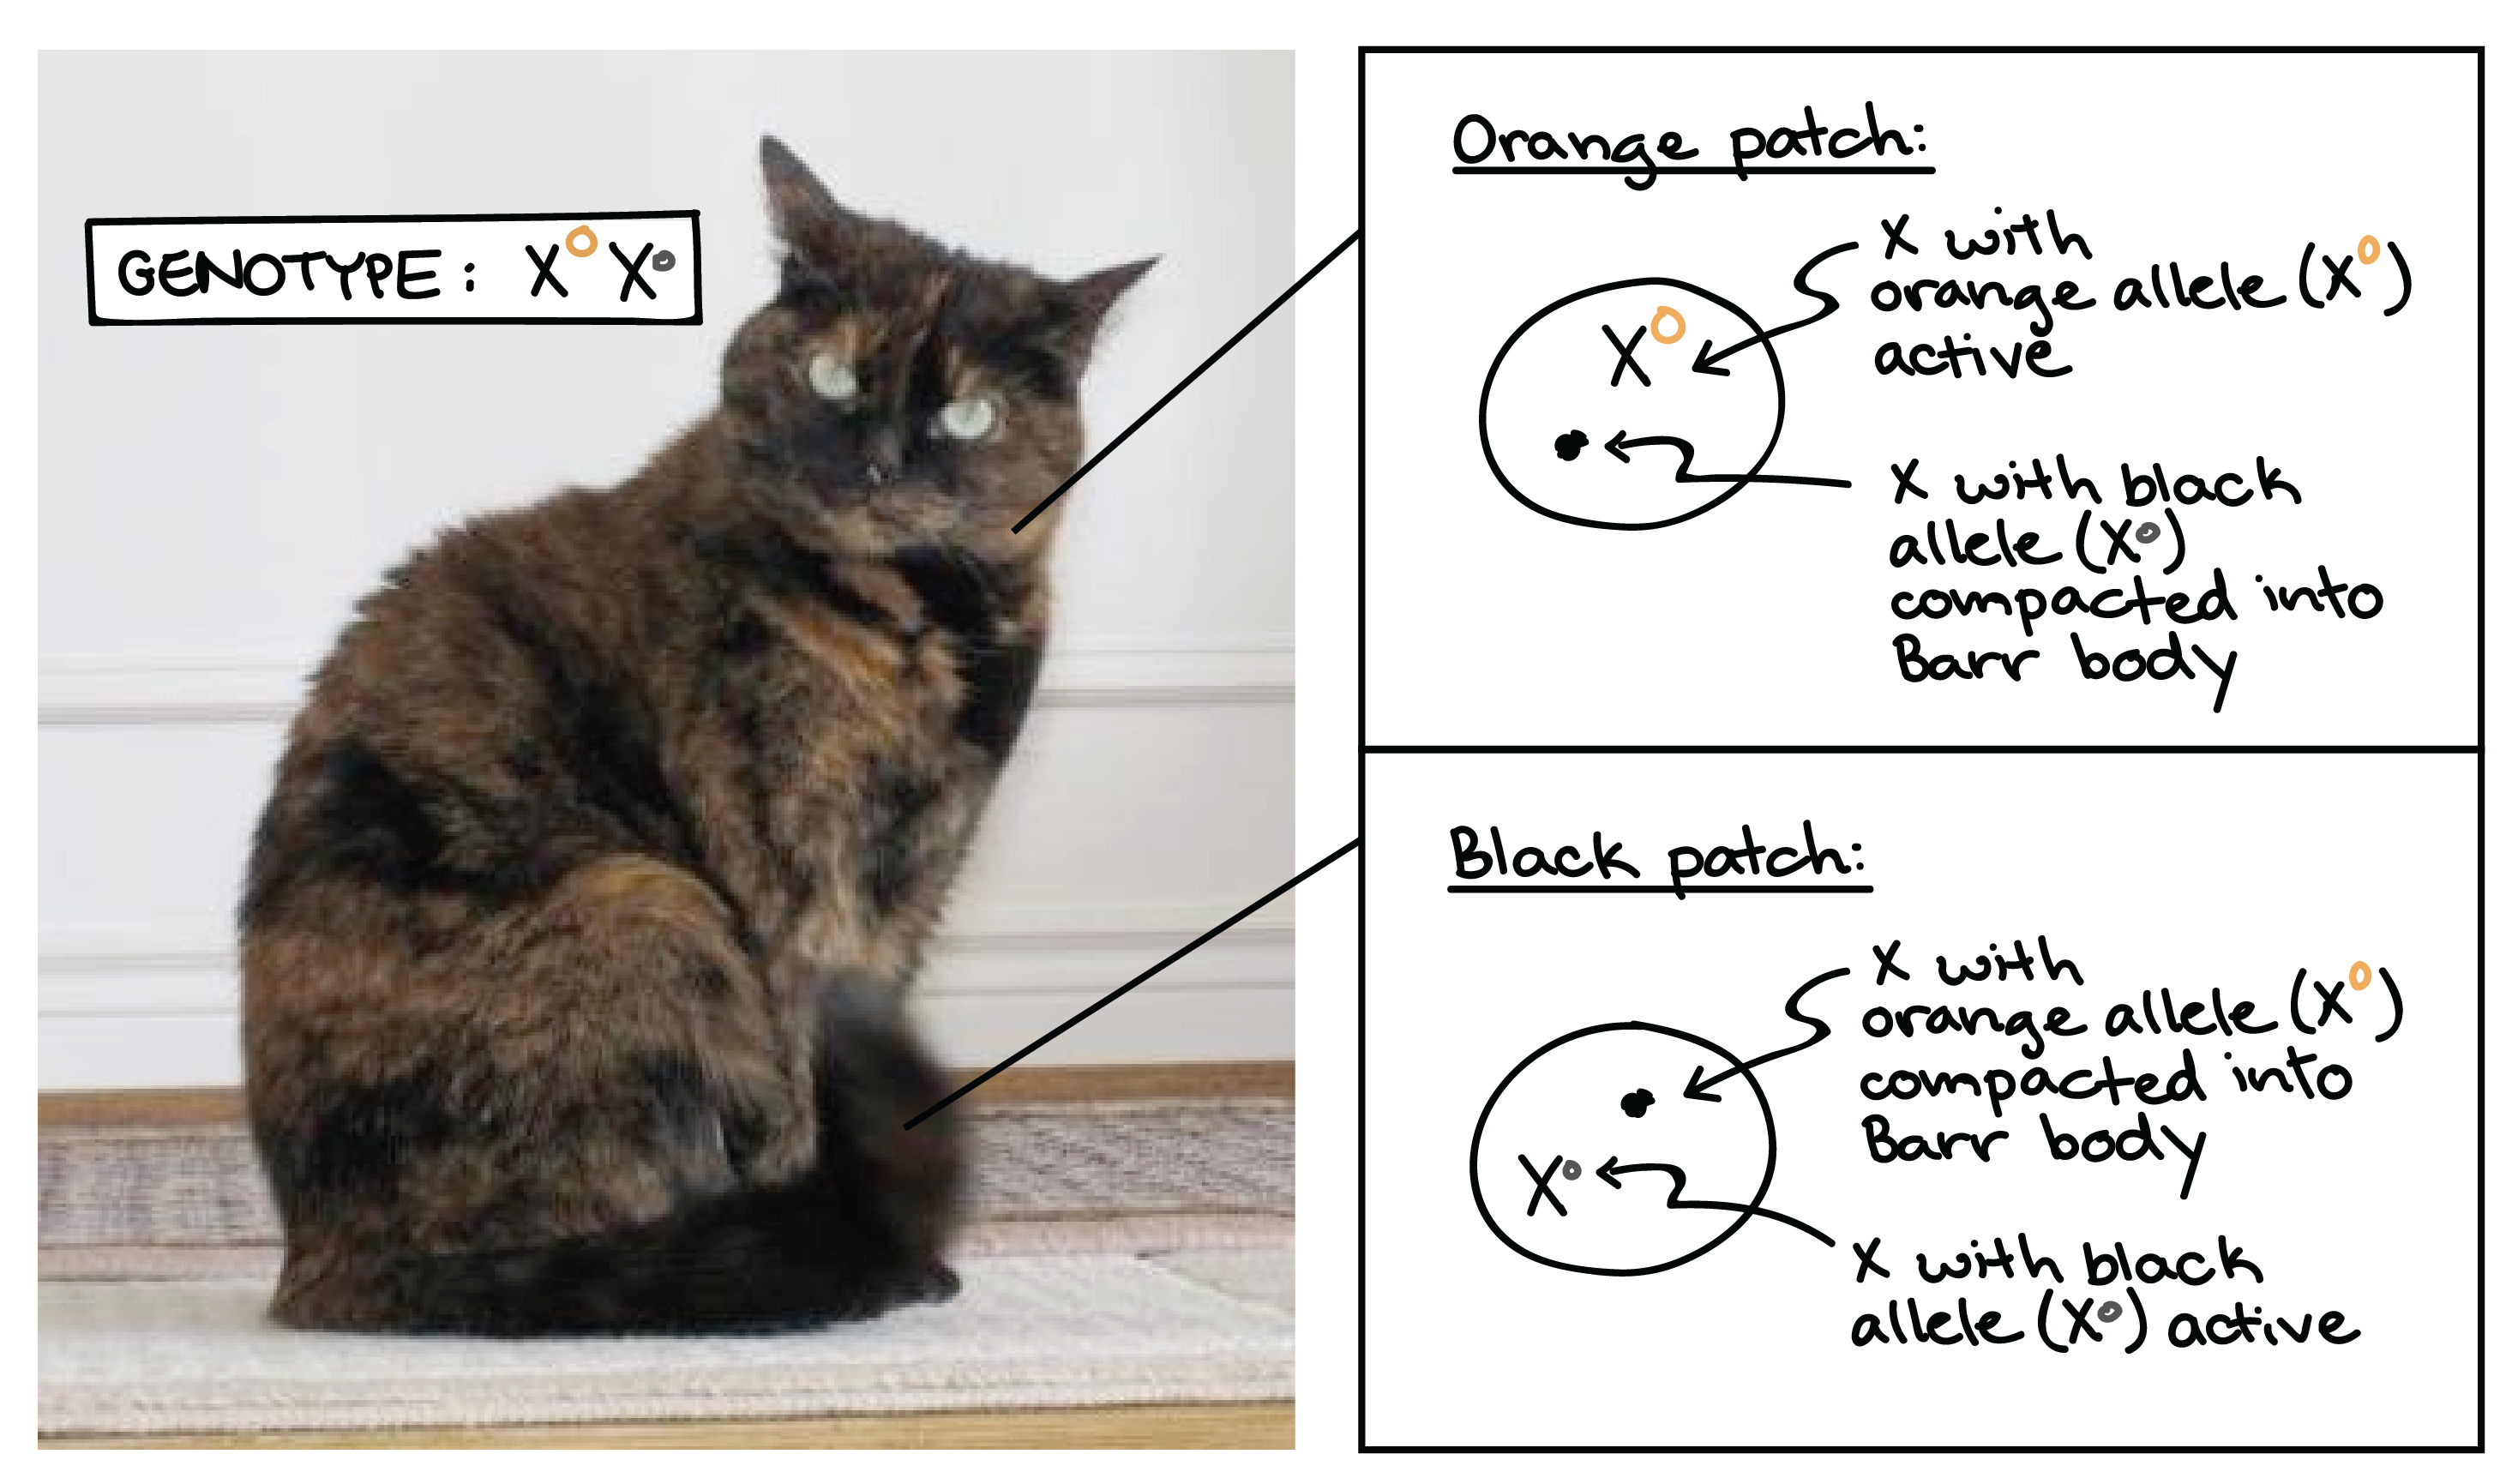 Image of a tortoiseshell cat, illustrating the X-inactivation processes responsible for the different patches of color on its coat. The cat has a mix of black and tan patches of fur, some small and some large. The cat's genotype is $\text X^O\text X^o$, where the large _O_ stands for organge and the small _o_ stands for black. * The orange patch is made up of cells in which the X  with the orange allele ($\text X^O$) is active, while the X with the black allele ($\text X^o$) is compacted into a Barr body.* The black patch is made up of cells in which the X  with the black allele ($\text X^o$) is active, while the X with the orange allele ($\text X^O$) is compacted into a Barr body.